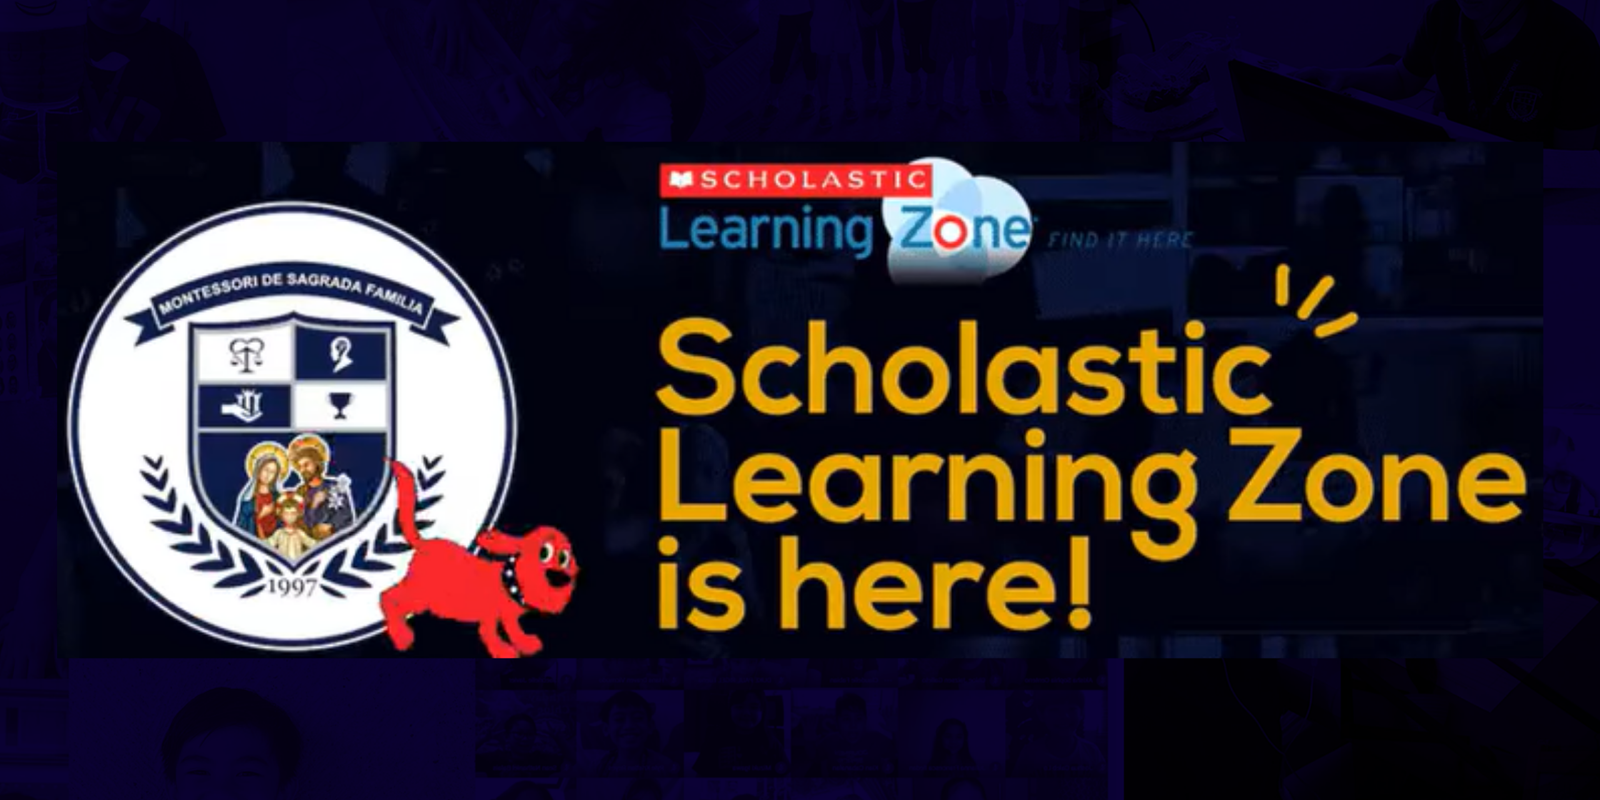 Video walkthrough of the Scholastic Learning Zone - Elementary